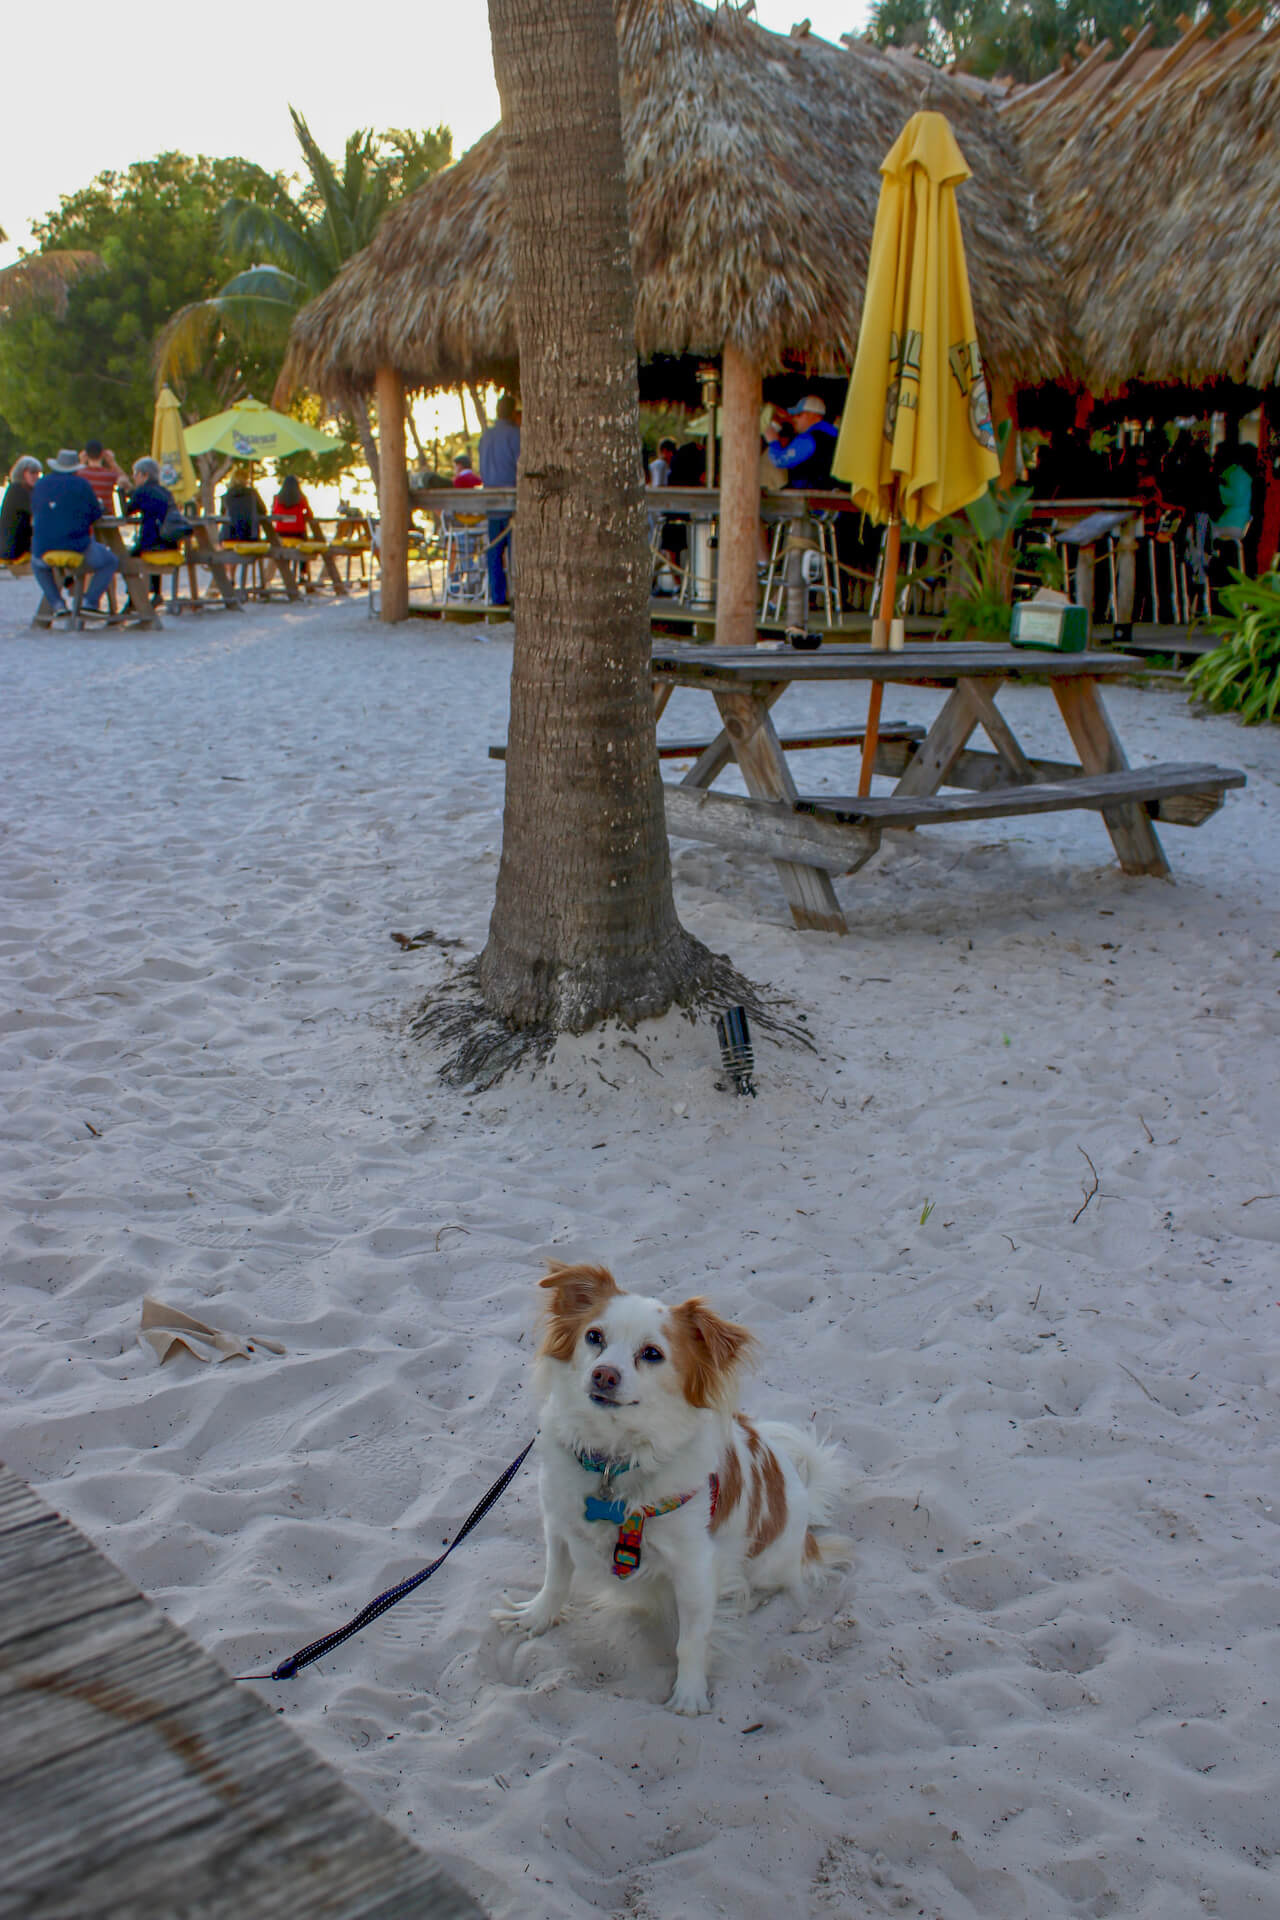 Enjoy a cold beer, cocktail, or wine under an umbrella with your toes in the sand or under the open-air , waterfront Tiki Hut at O'Leary's downtown Sarasota, Florida. Dog Friendly too! Must Do Visitor Guides, MustDo.com.